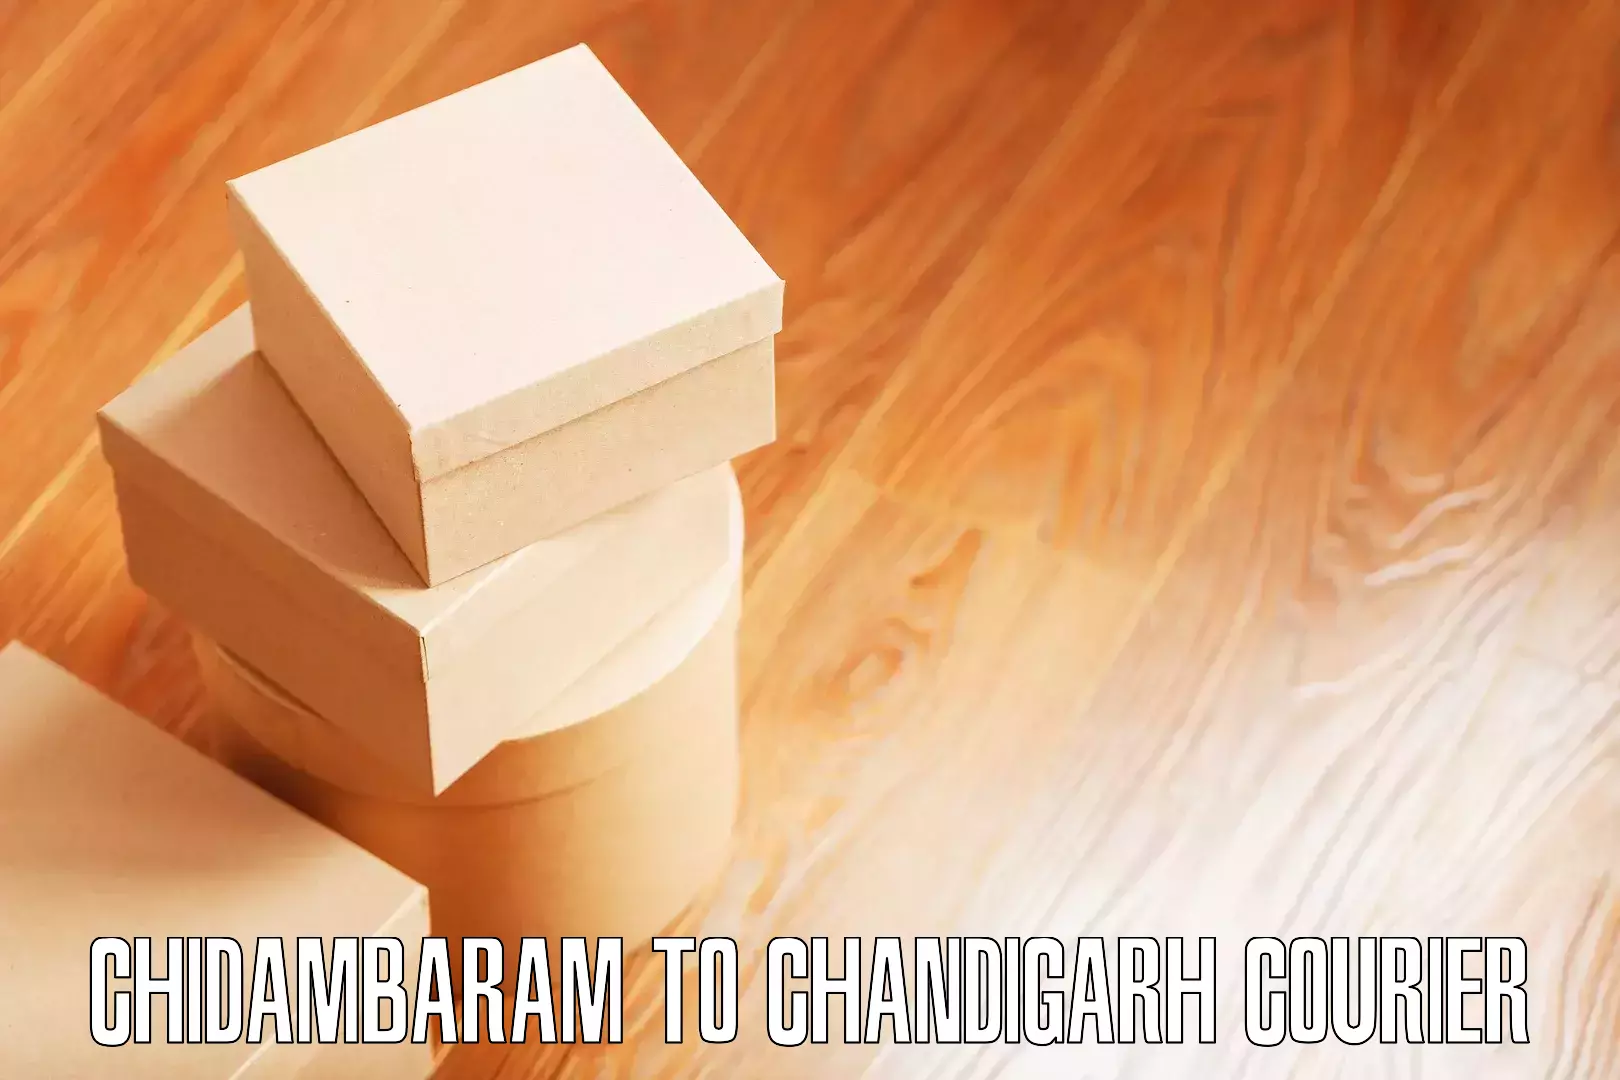 Moving and handling services in Chidambaram to Chandigarh